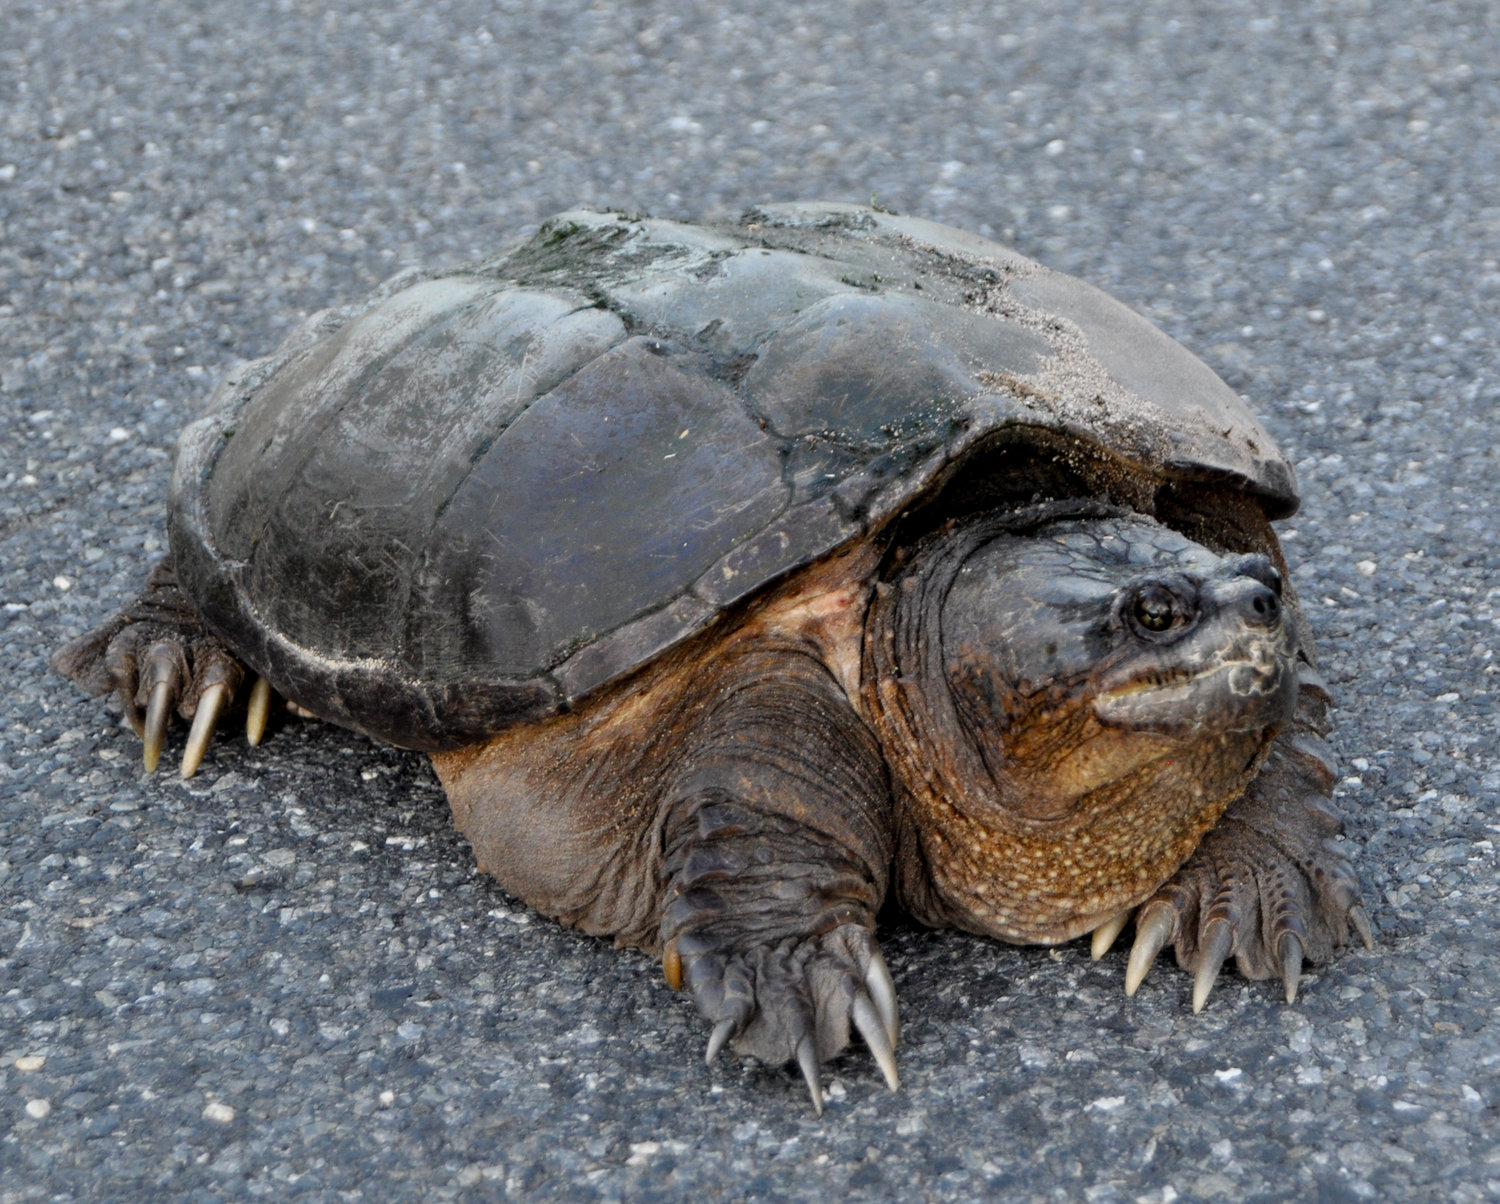 Slow your roll. Turtles are quite stubborn and are usually trying to get somewhere specific.